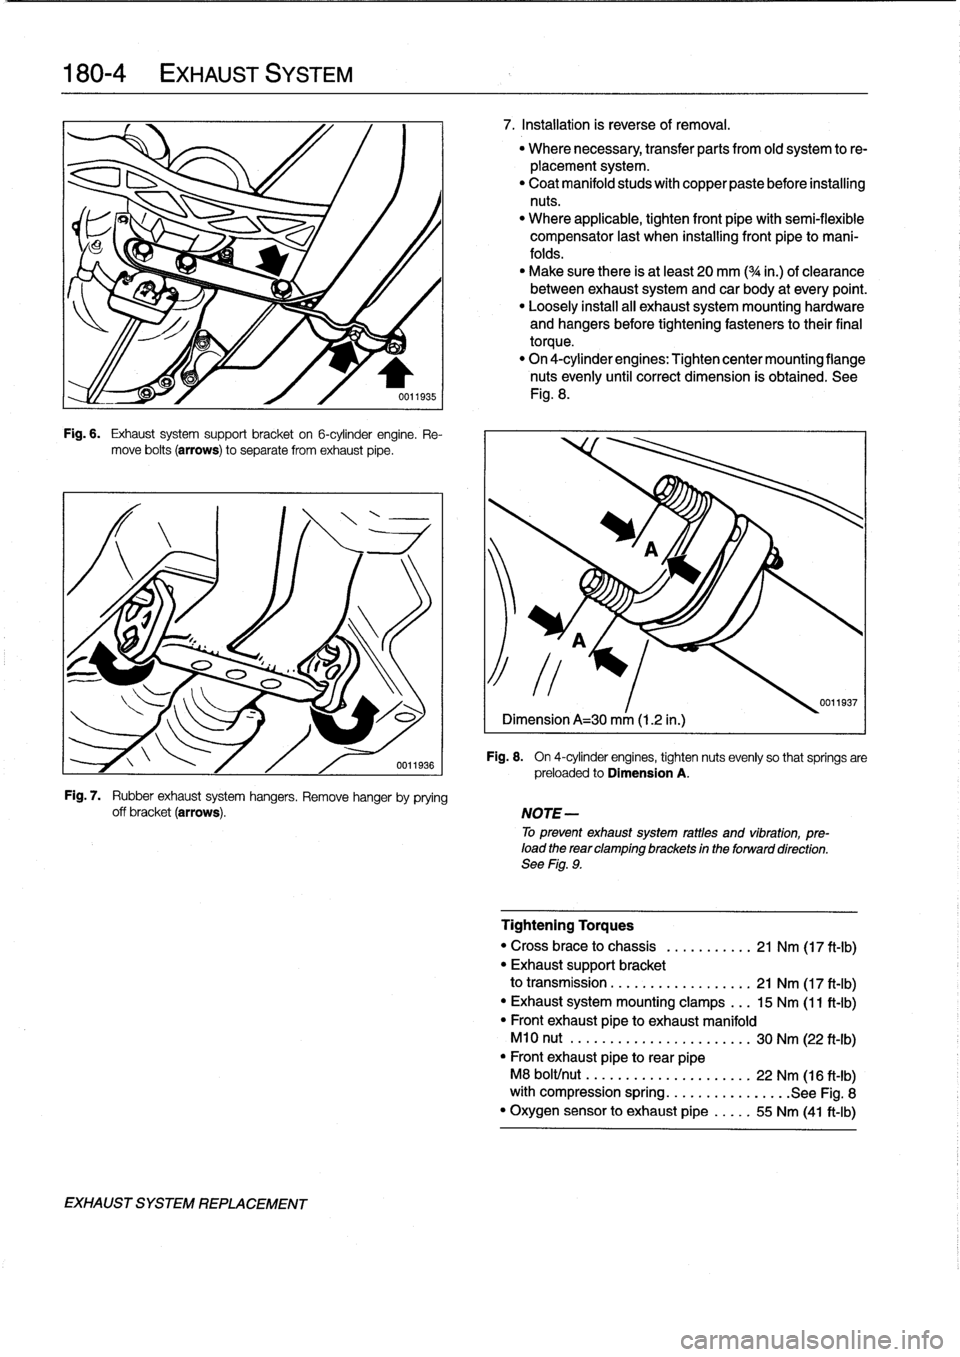 BMW 328i 1994 E36 Workshop Manual 
180-
4

	

EXHAUST
SYSTEM

Fig
.
6
.

	

Exhaust
system
support
bracket
on
6-cylinder
engine
.
Re-
move
bolts
(arrows)
to
separate
from
exhaust
pipe
.

Fig
.
7
.

	

Rubber
exhaust
system
hangers
.
R